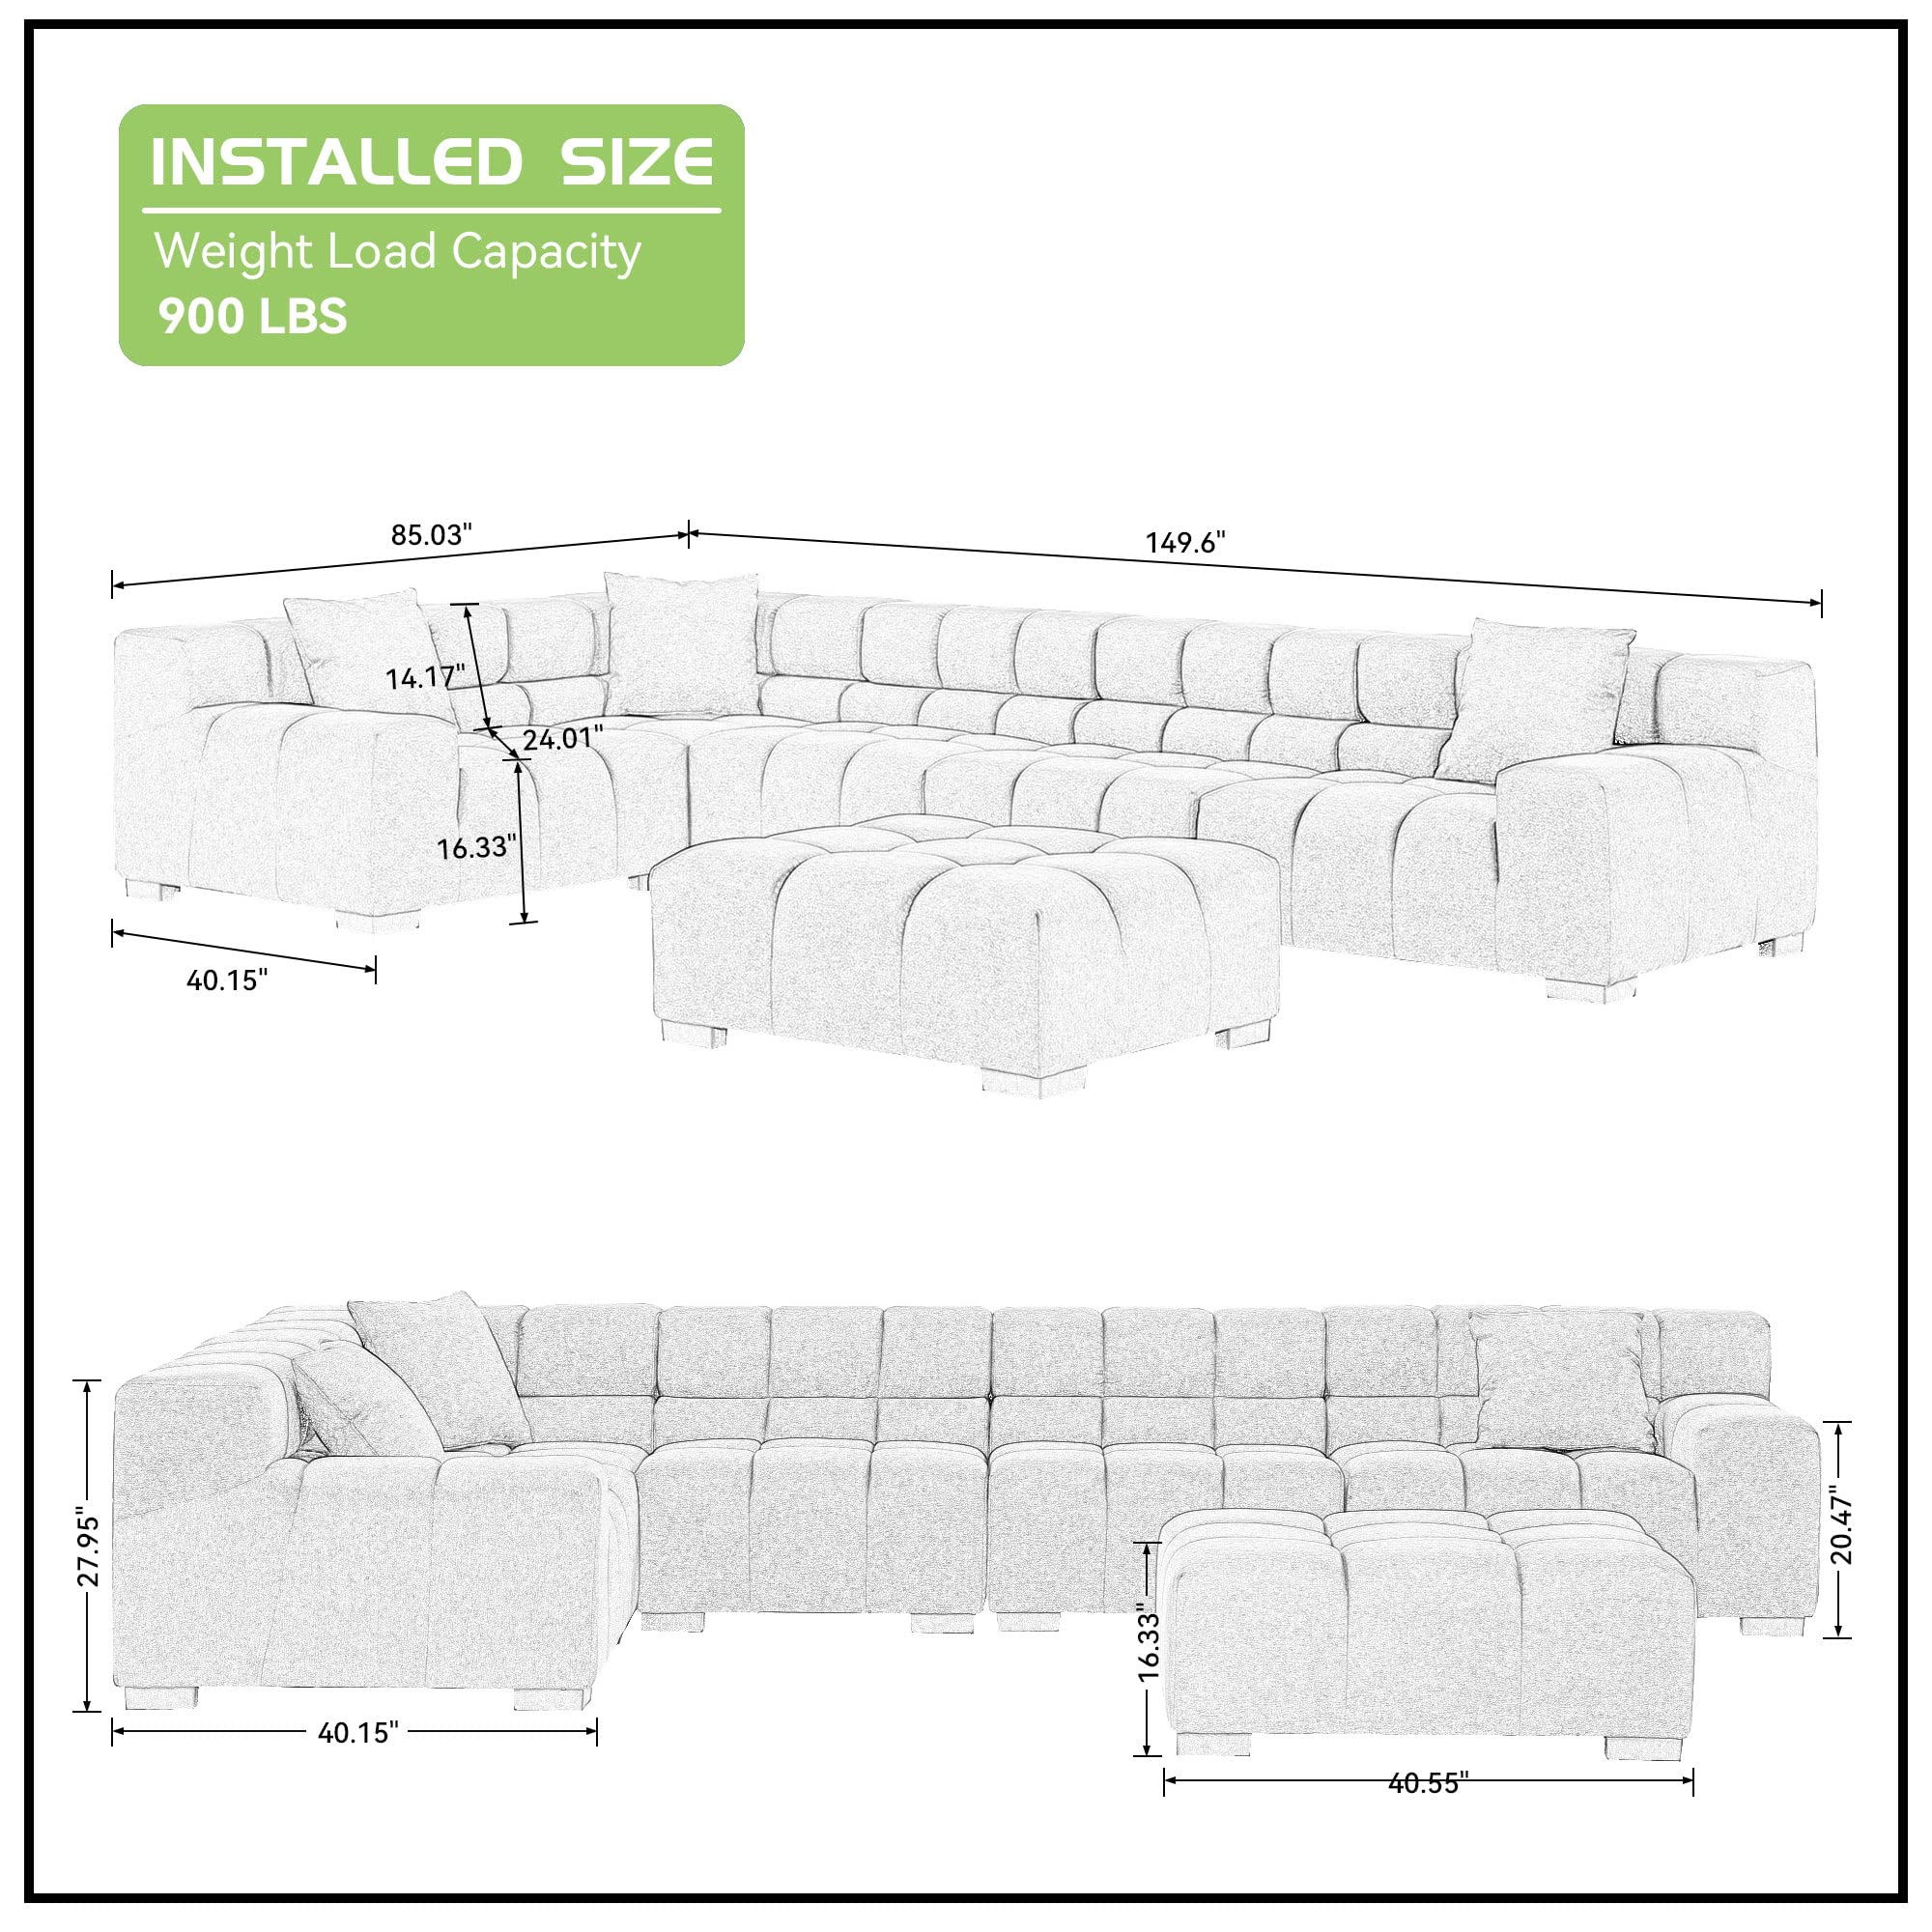 Modular Sectional Sofa 149.6" Sleeper Couch(White)